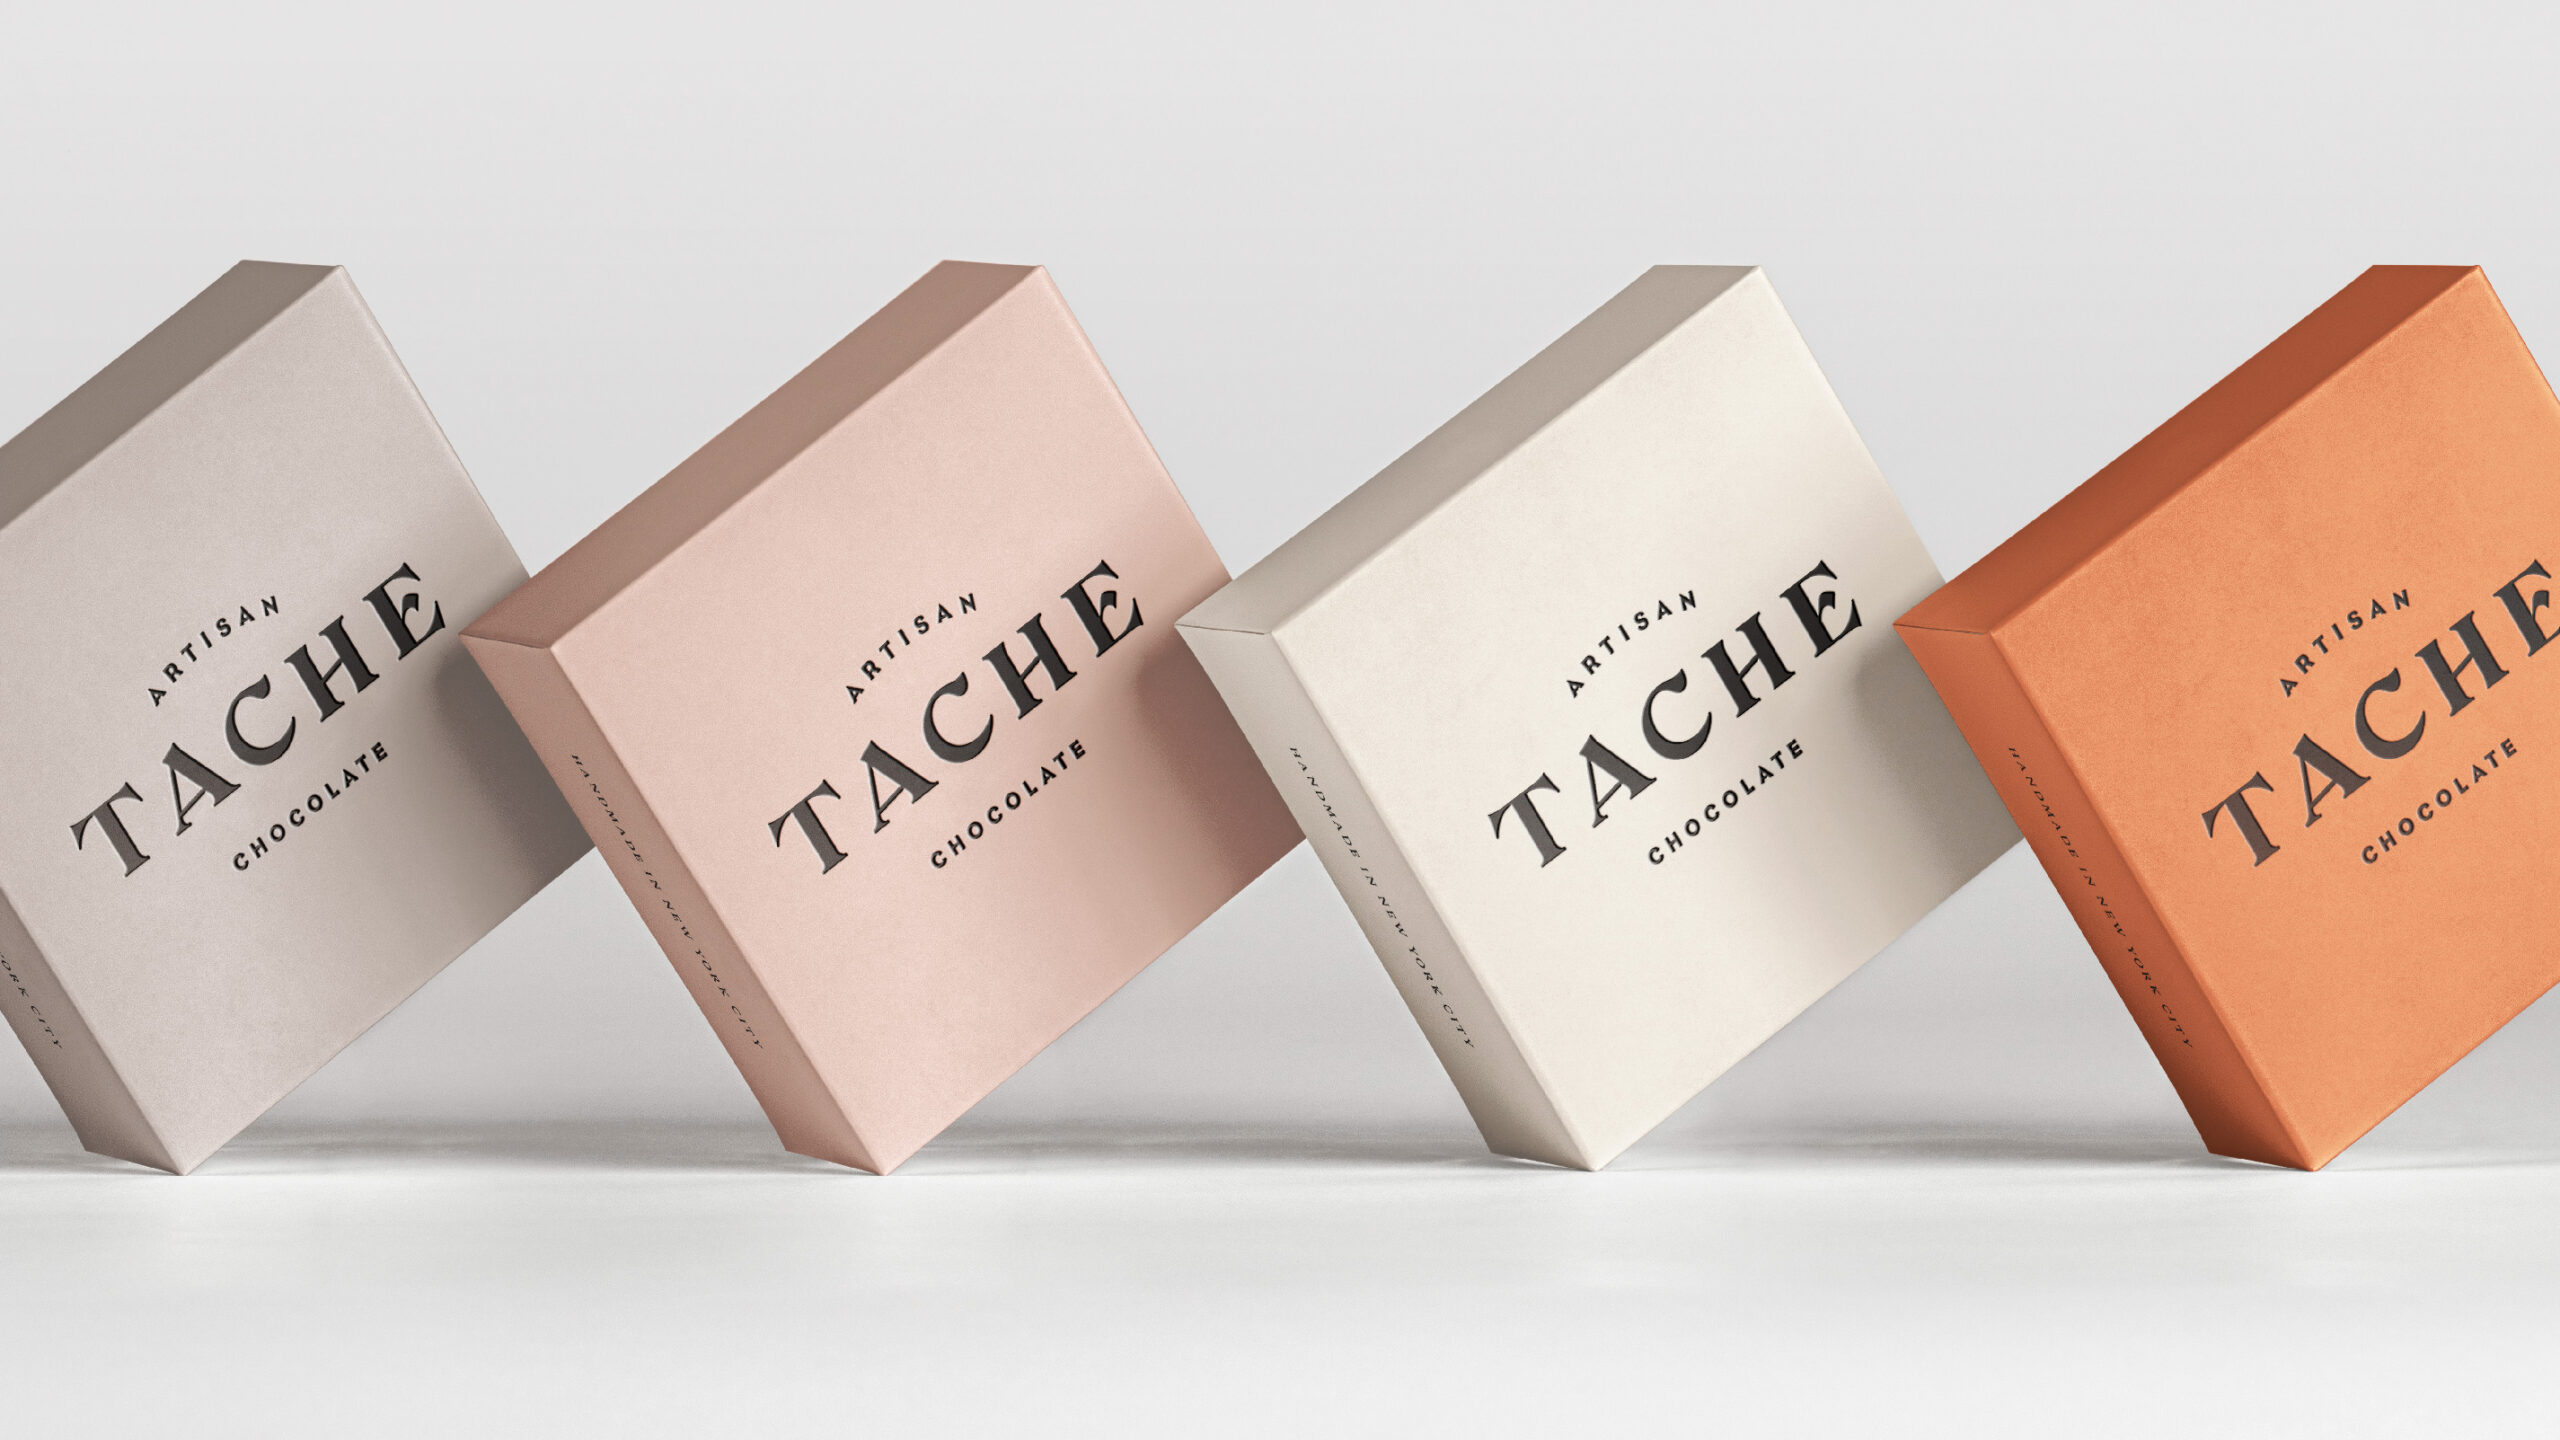 Luxury french chocolate boxes in pink, cream, and white.